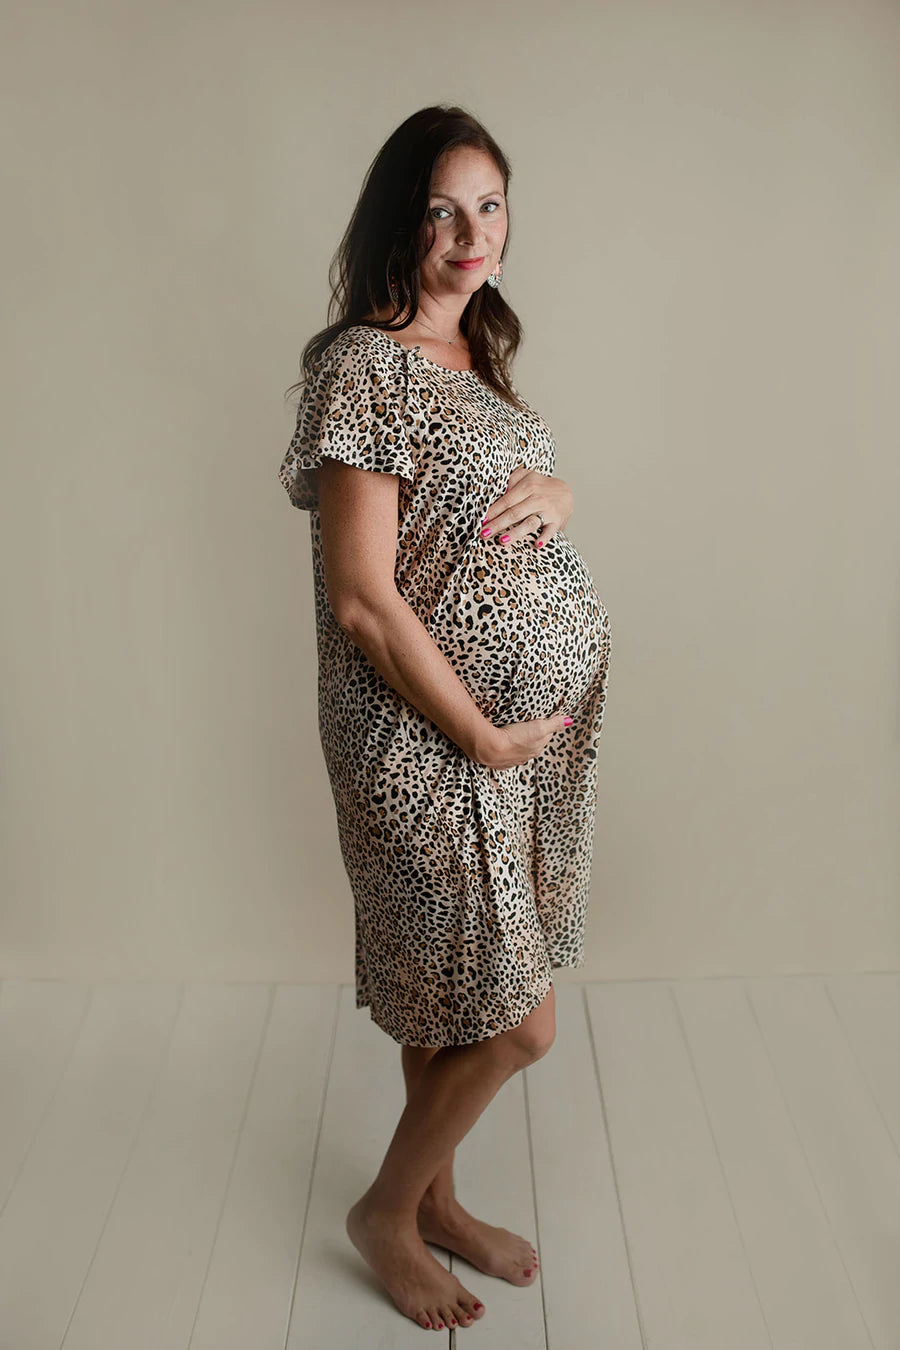 Leopard Print Labor and Delivery/nursing gown Baby in Styles